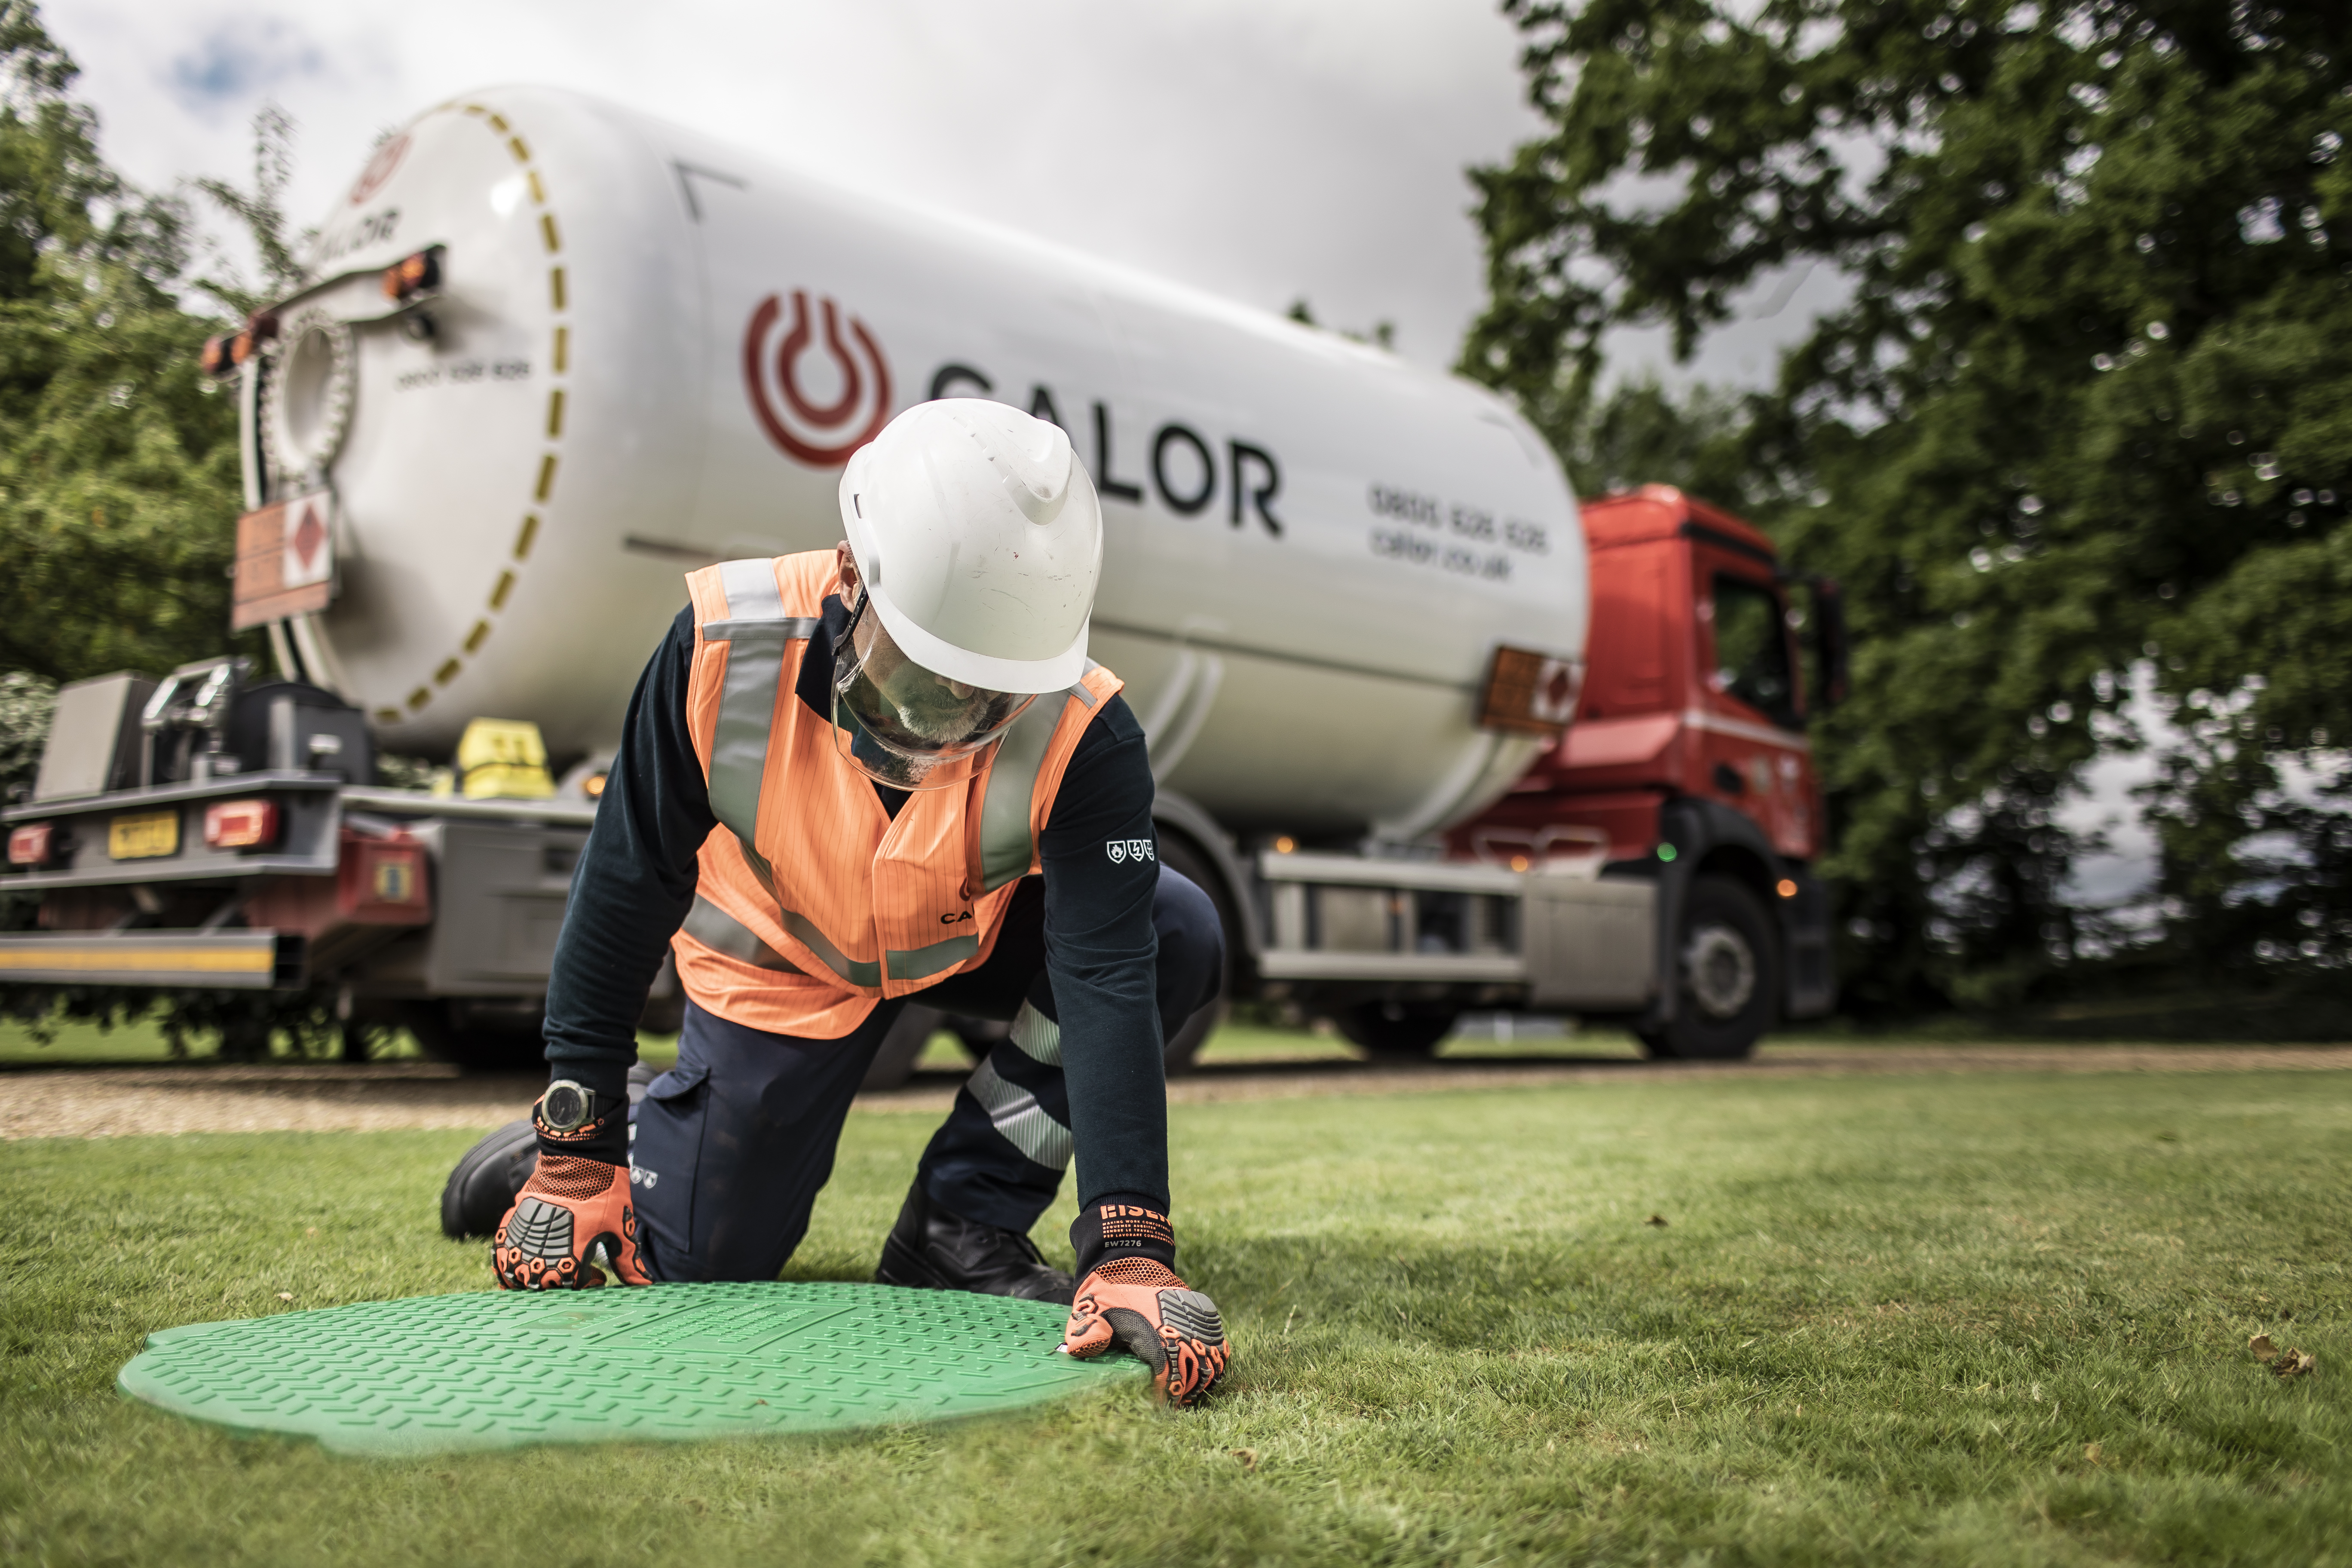 Calor engineer attending to a below ground tank